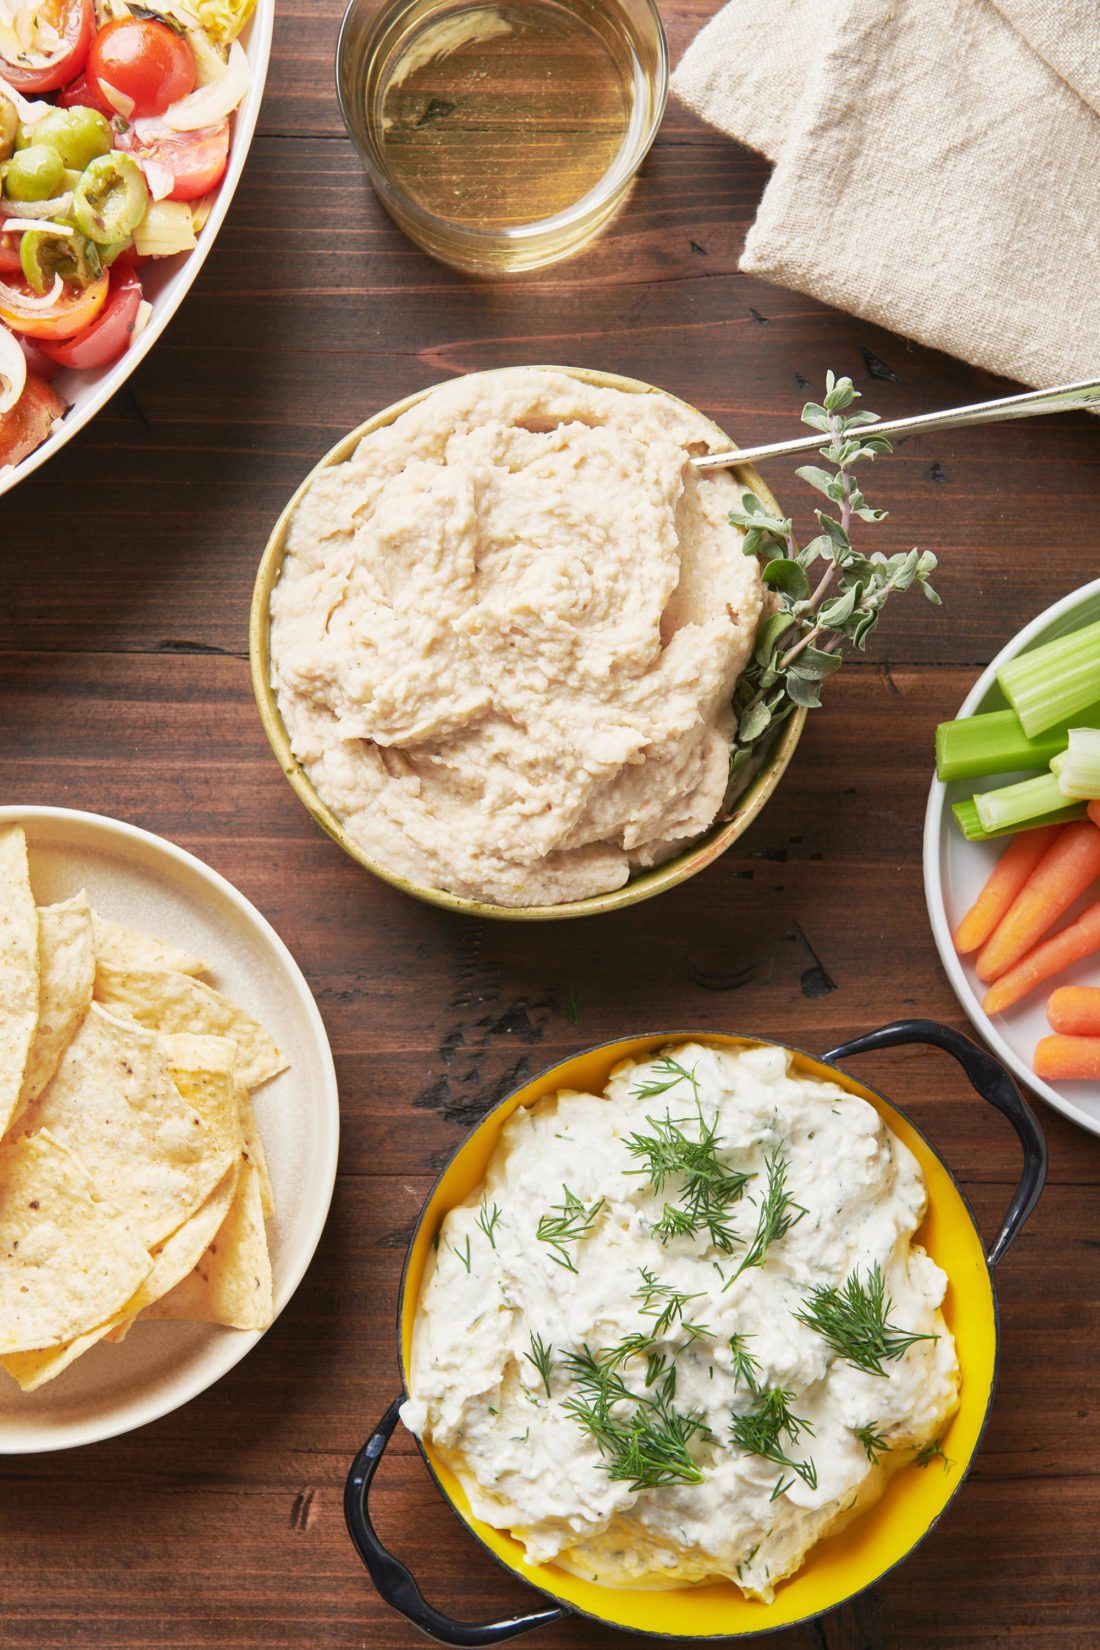 Bowls of Feta Yogurt Dip and hummus on a table with vegetables and chips.